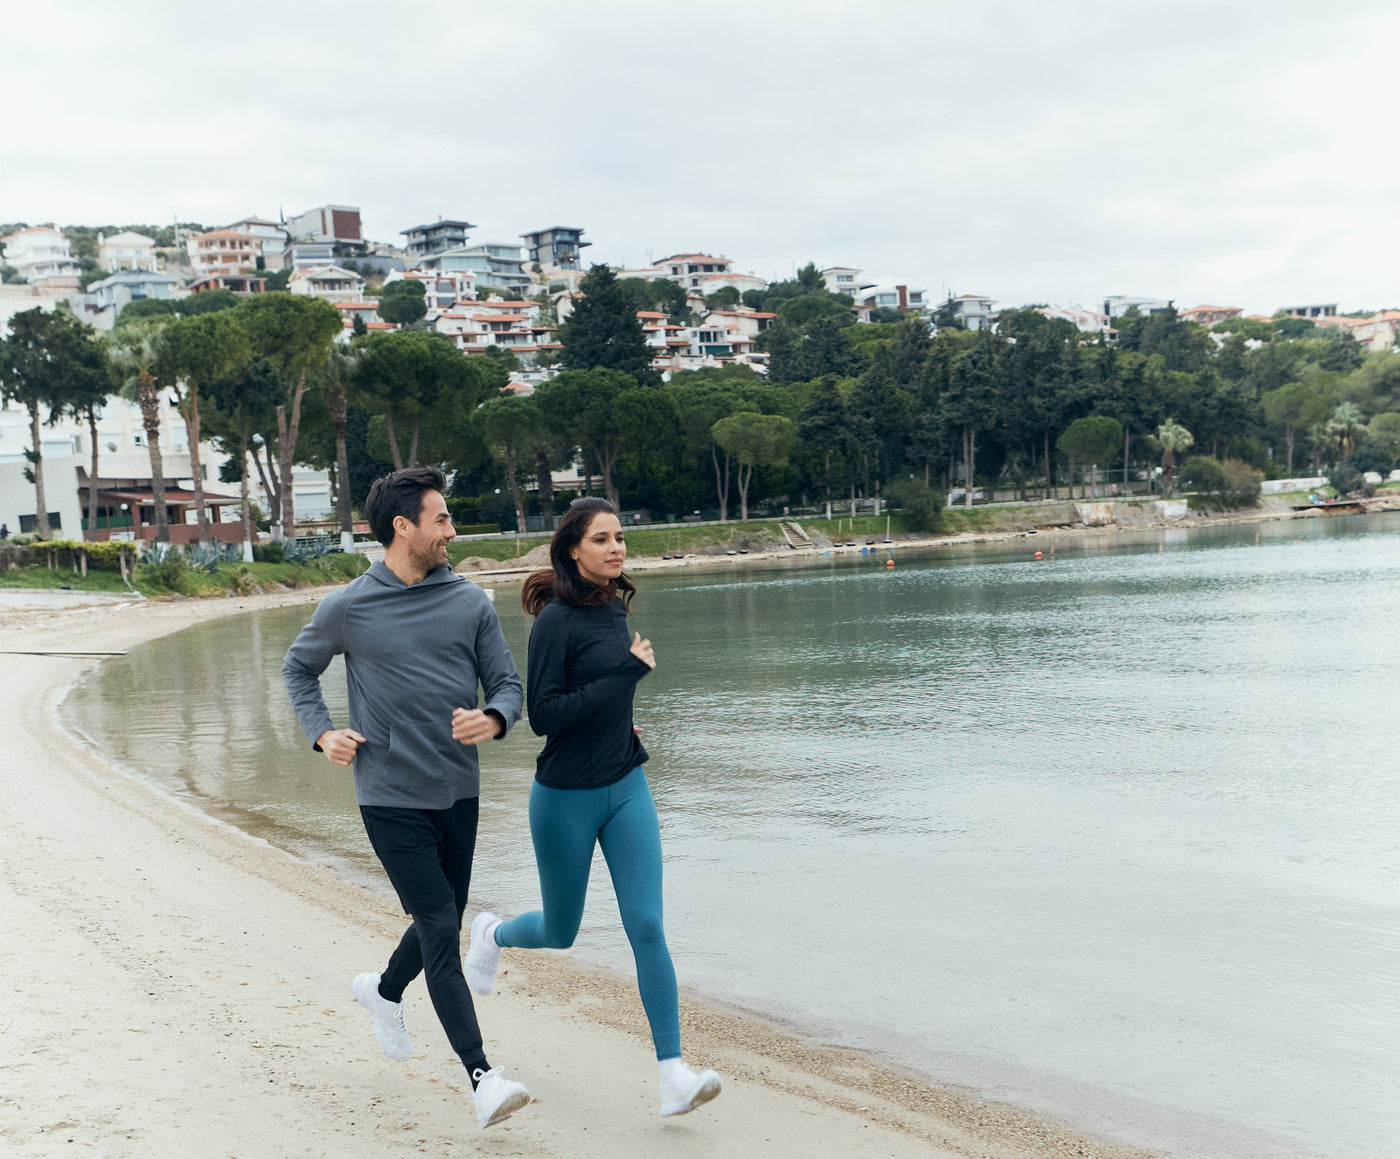 A woman and a man running in the beach.